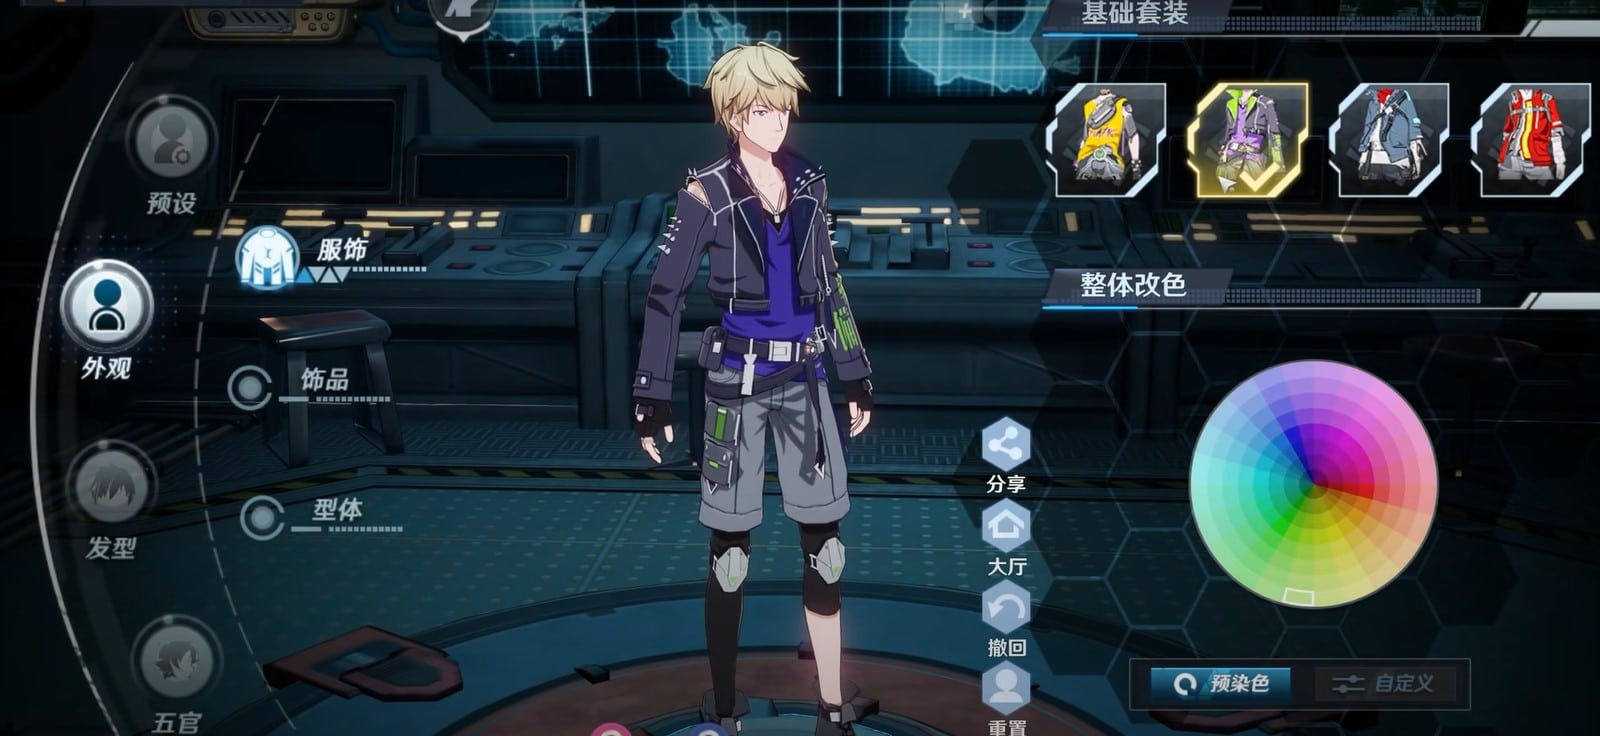 The game features an in-depth character creator